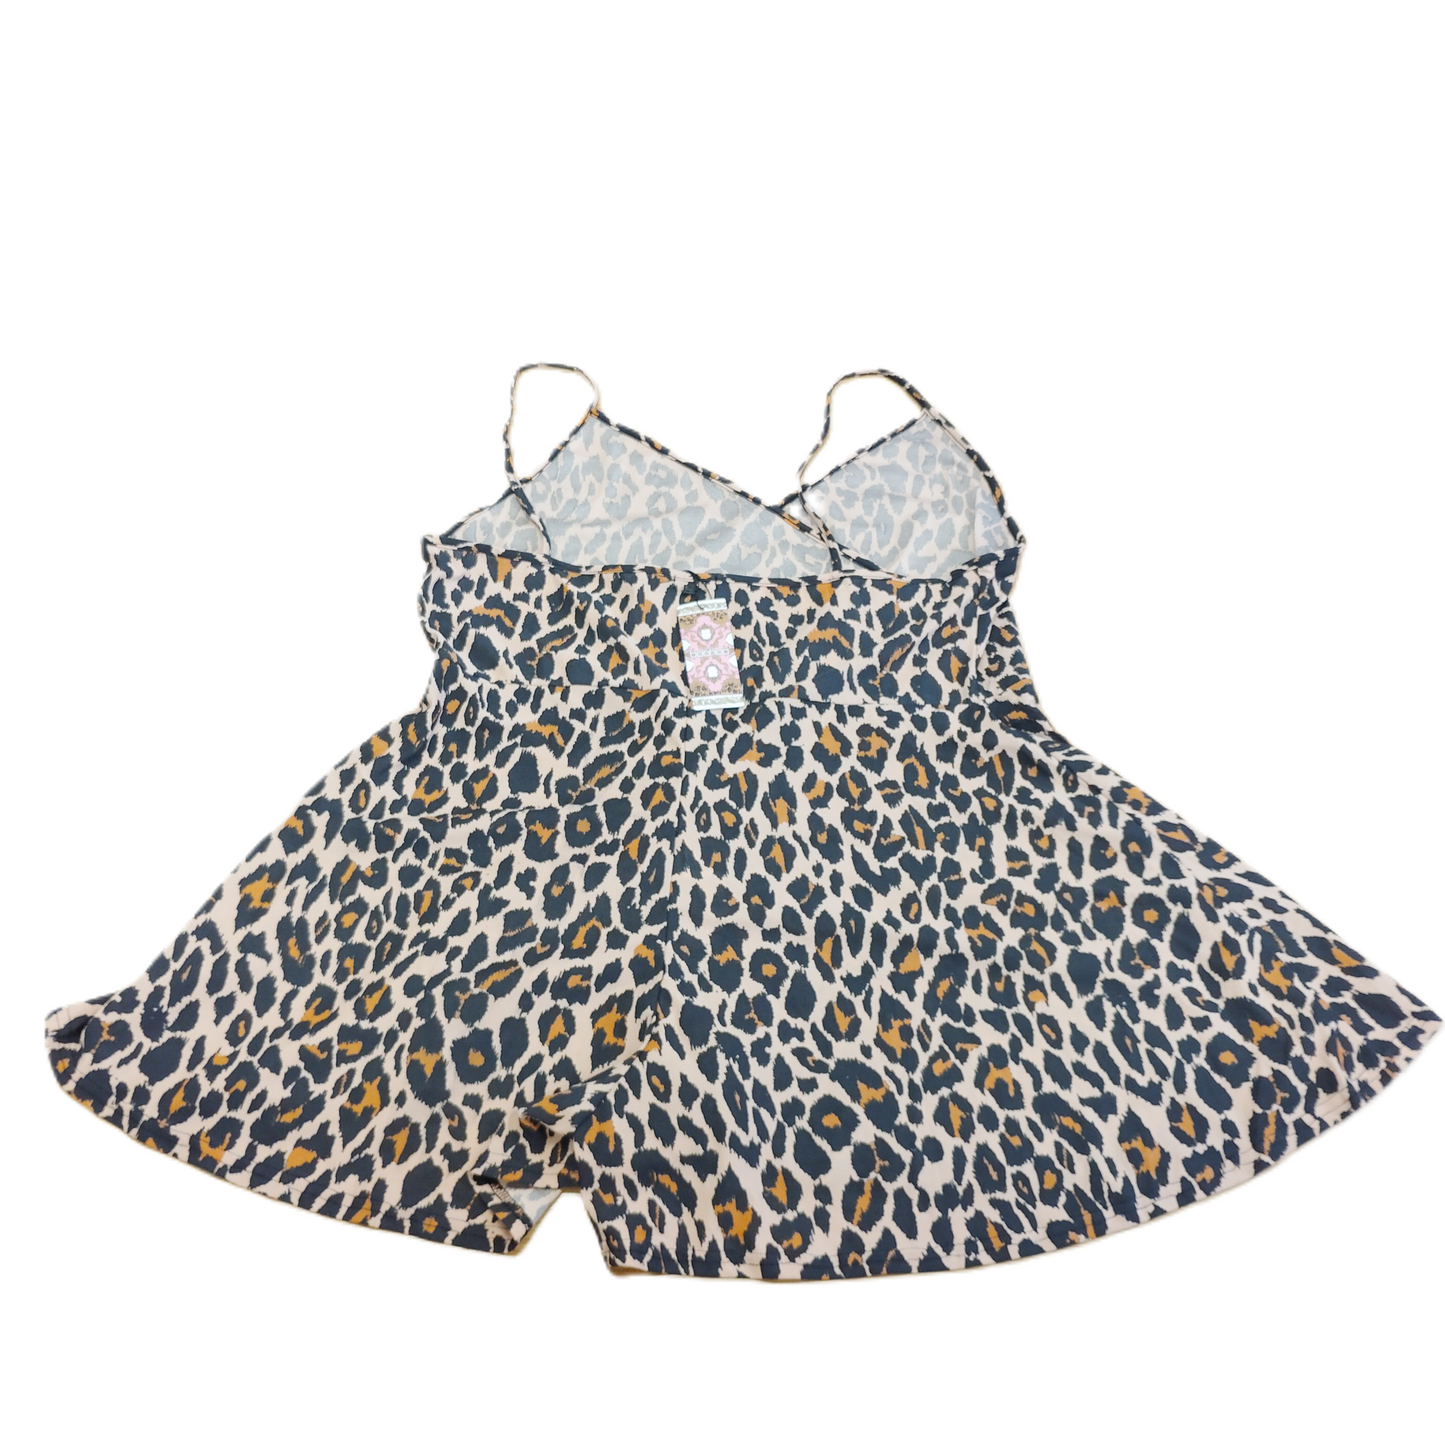 Leopard Print Romper By Boohoo Boutique, Size: 1x